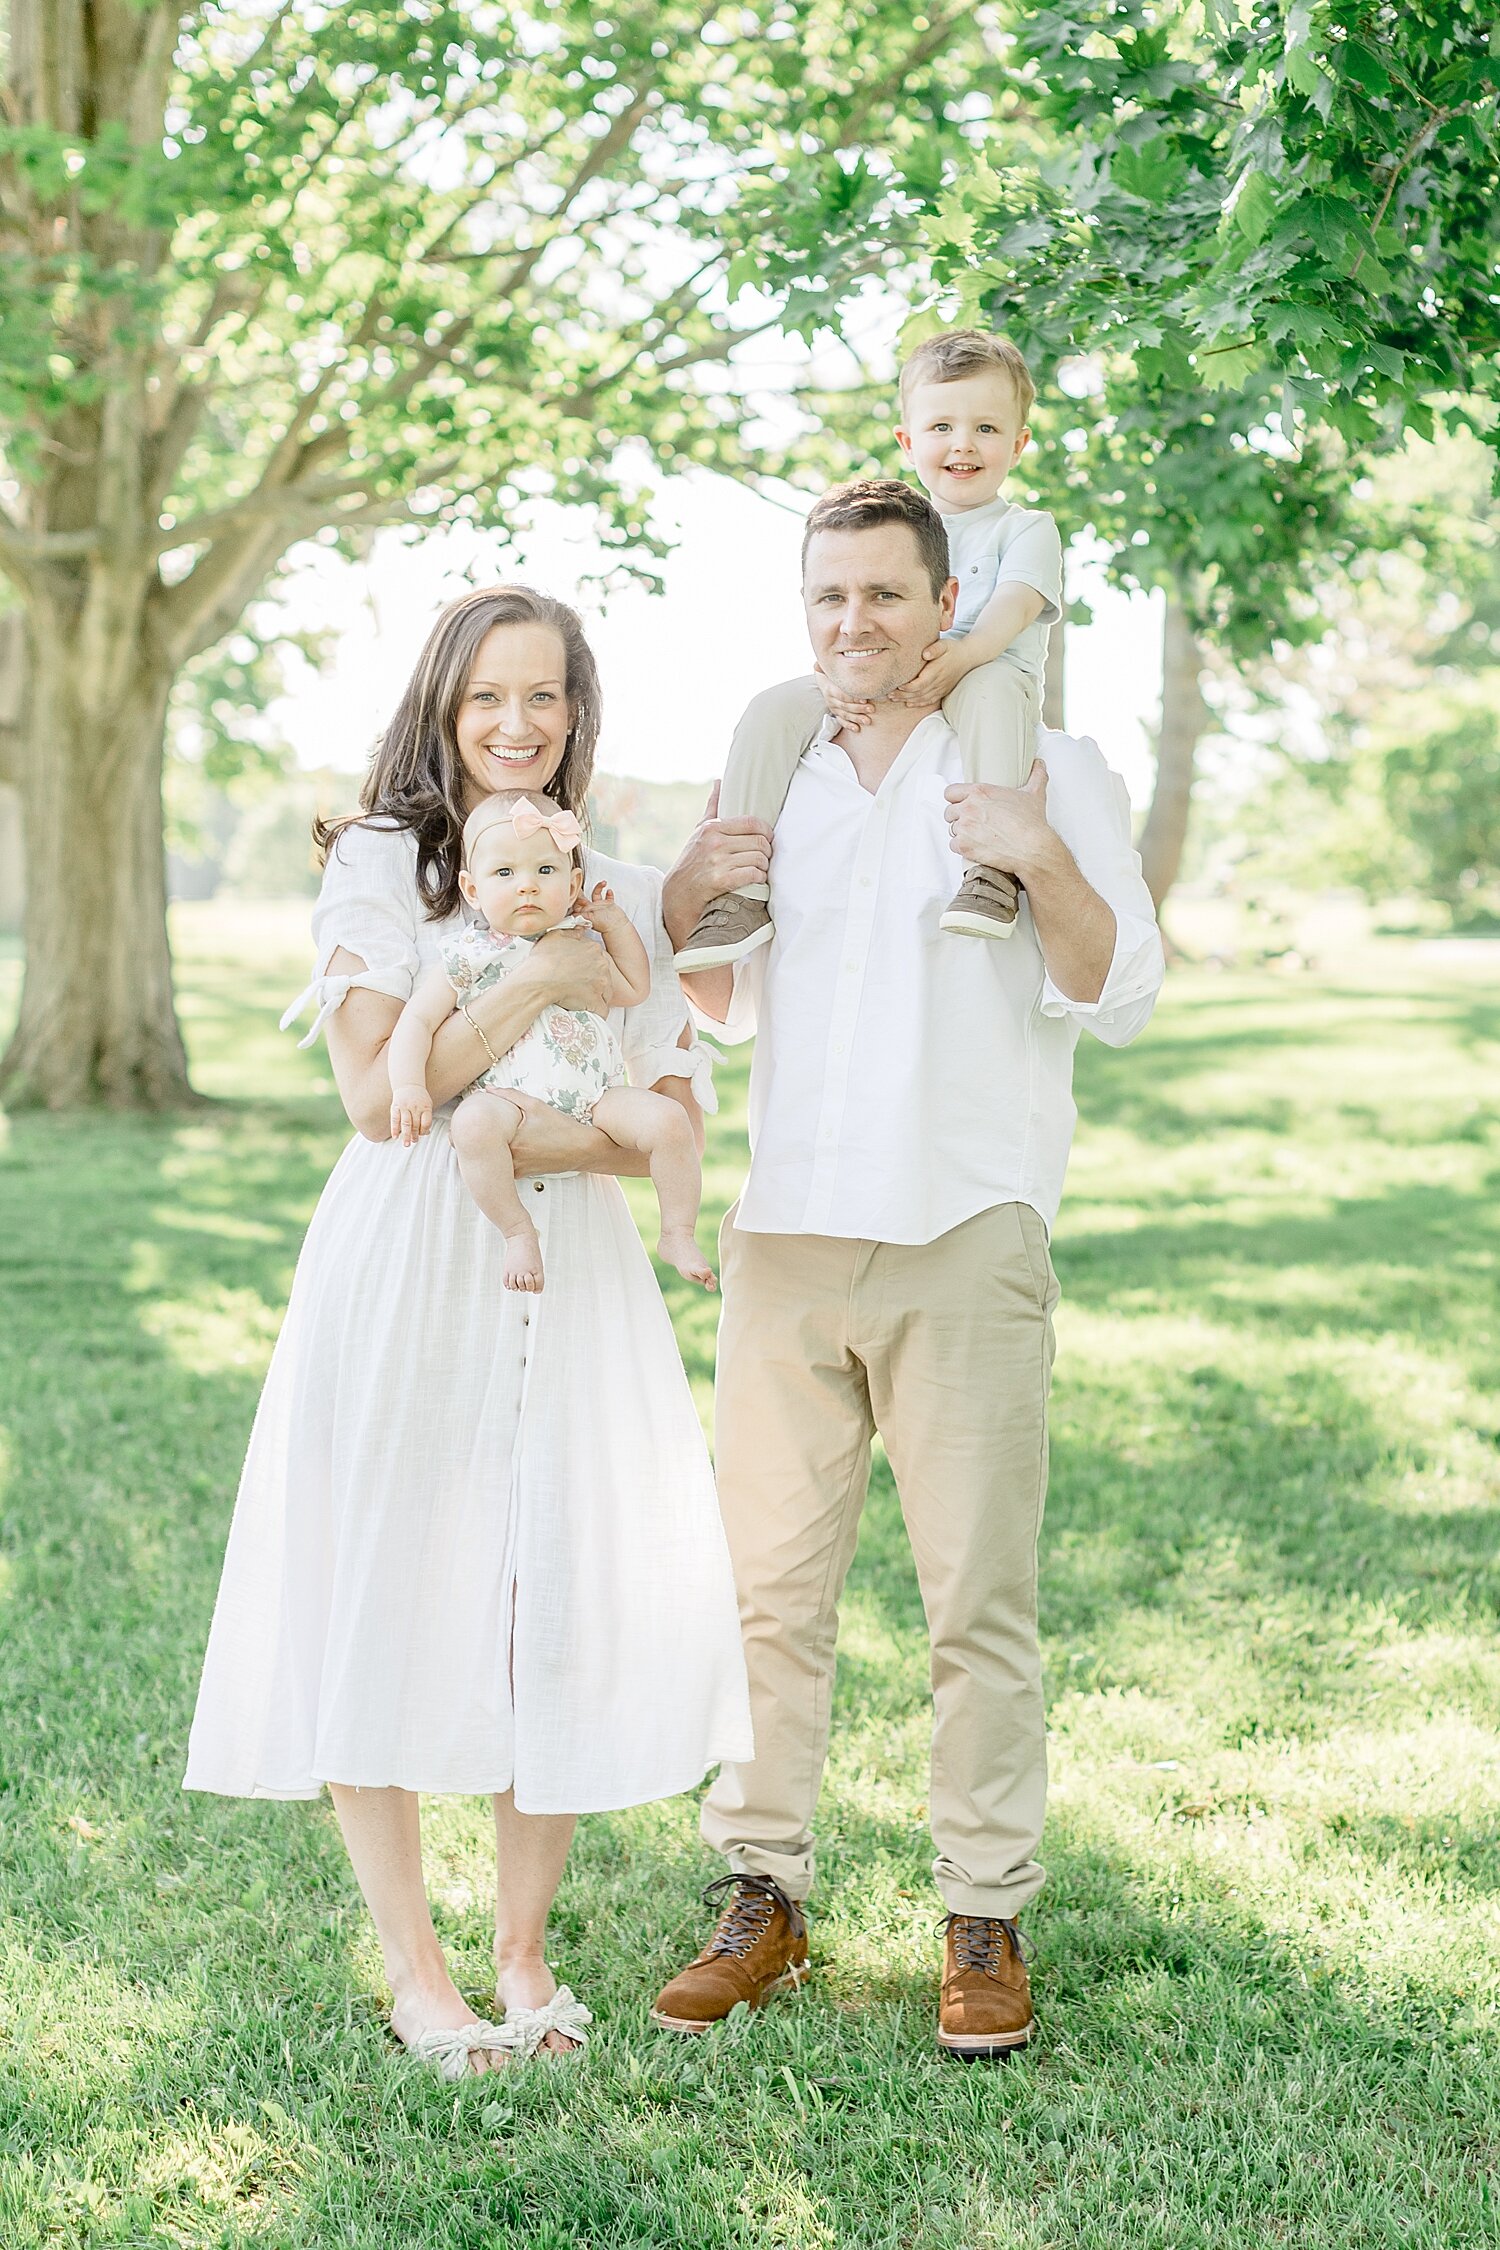 Summer Family Session at Sherwood Island State Park in Westport, CT | Kristin Wood Photography